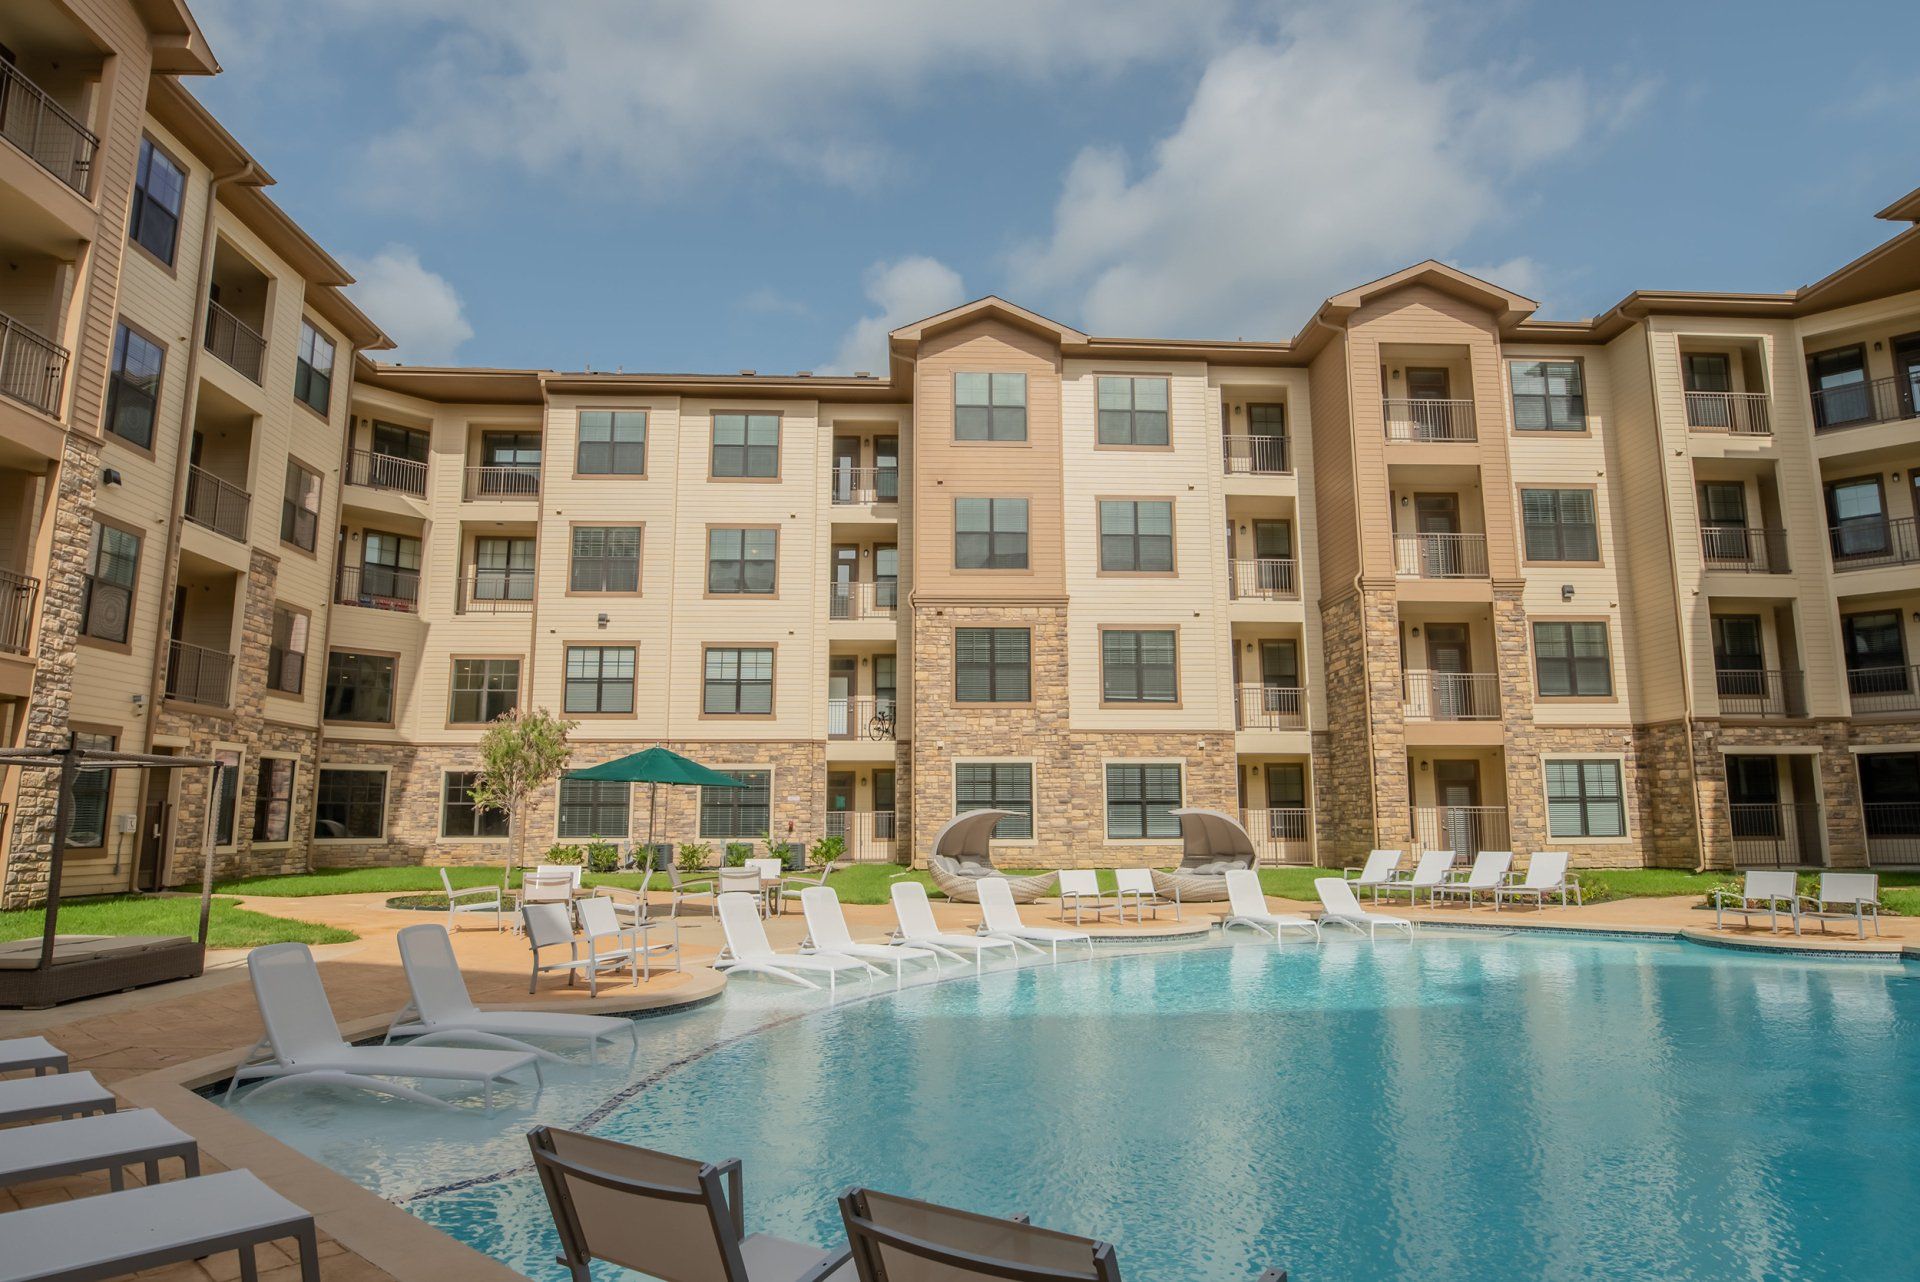 Haven at Liberty Hills | Poolside with Chairs and Apartment Building